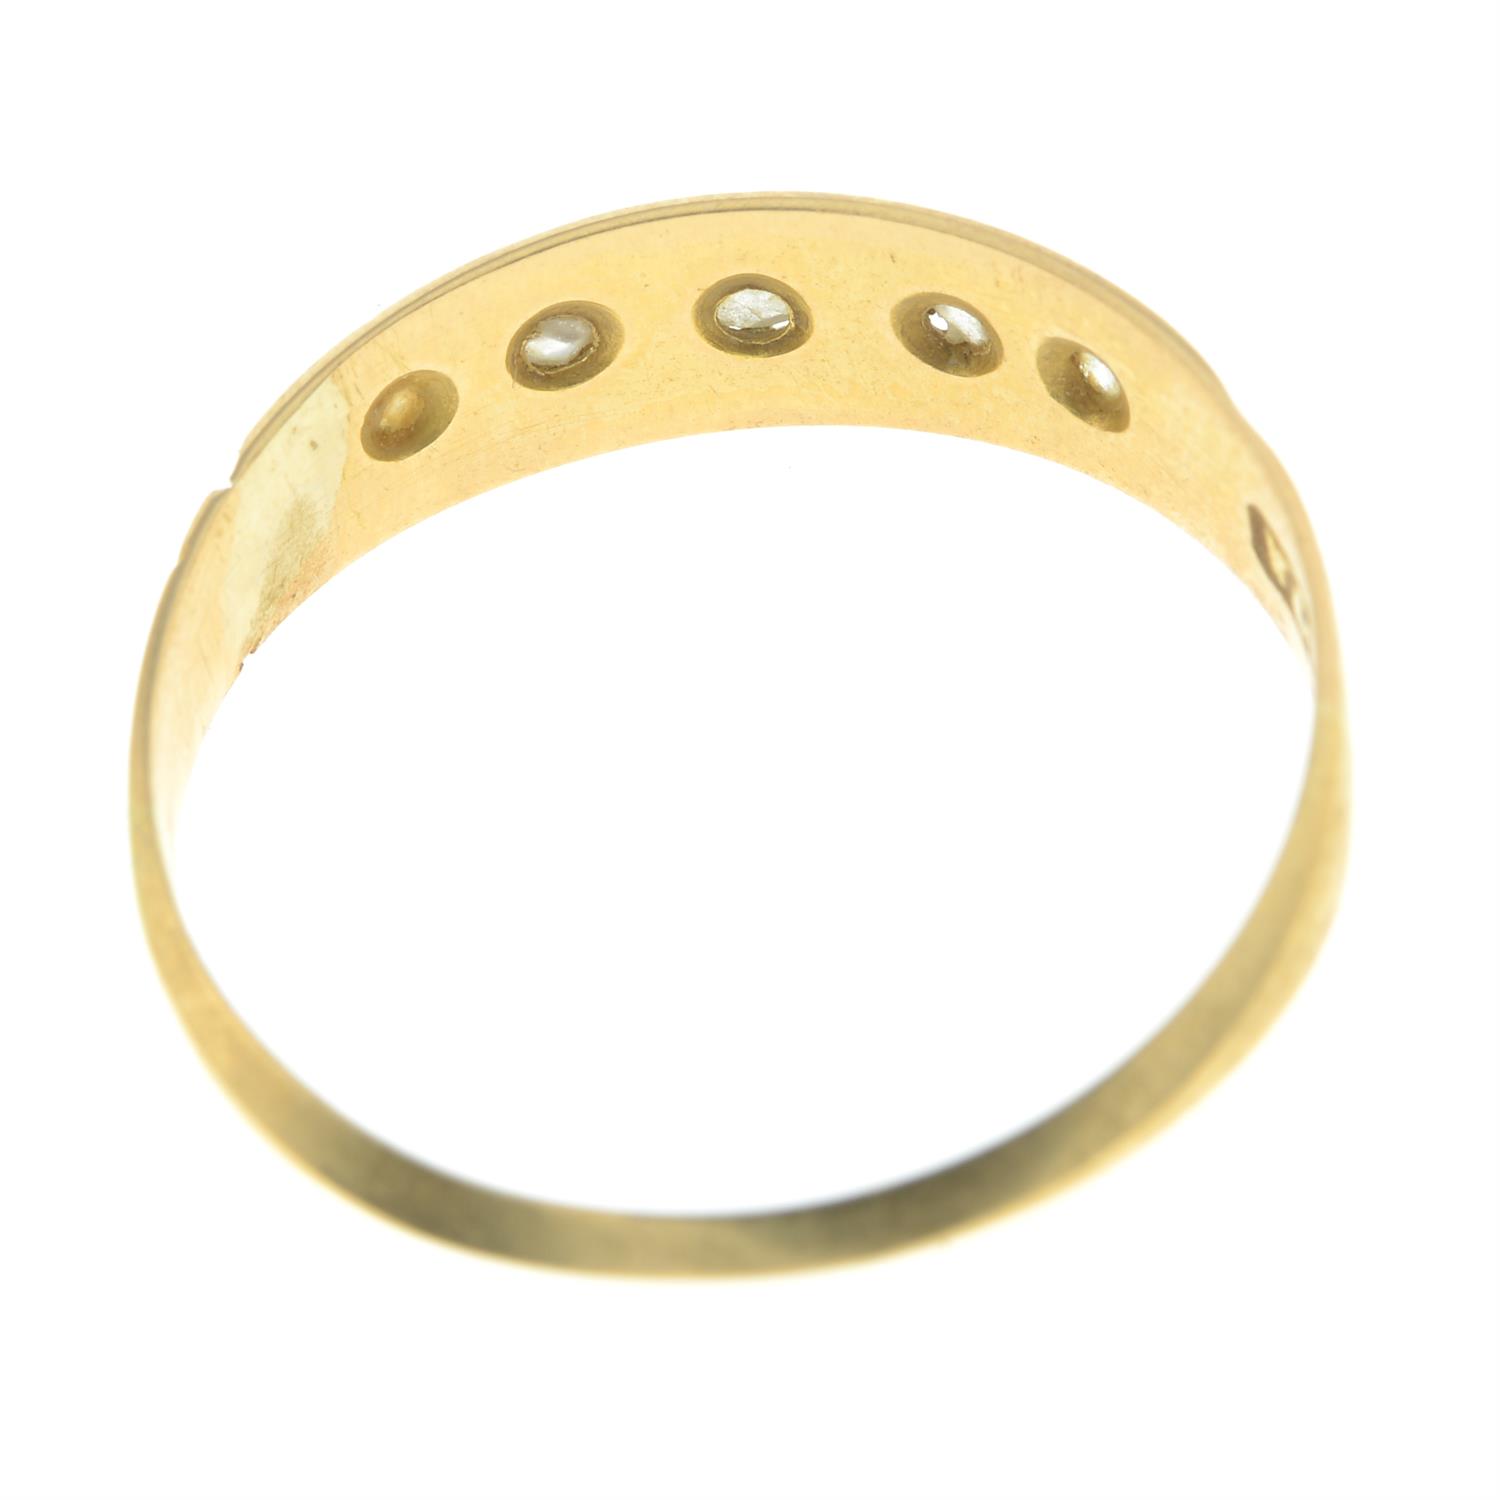 Early 20th century 18ct gold diamond ring - Image 2 of 2